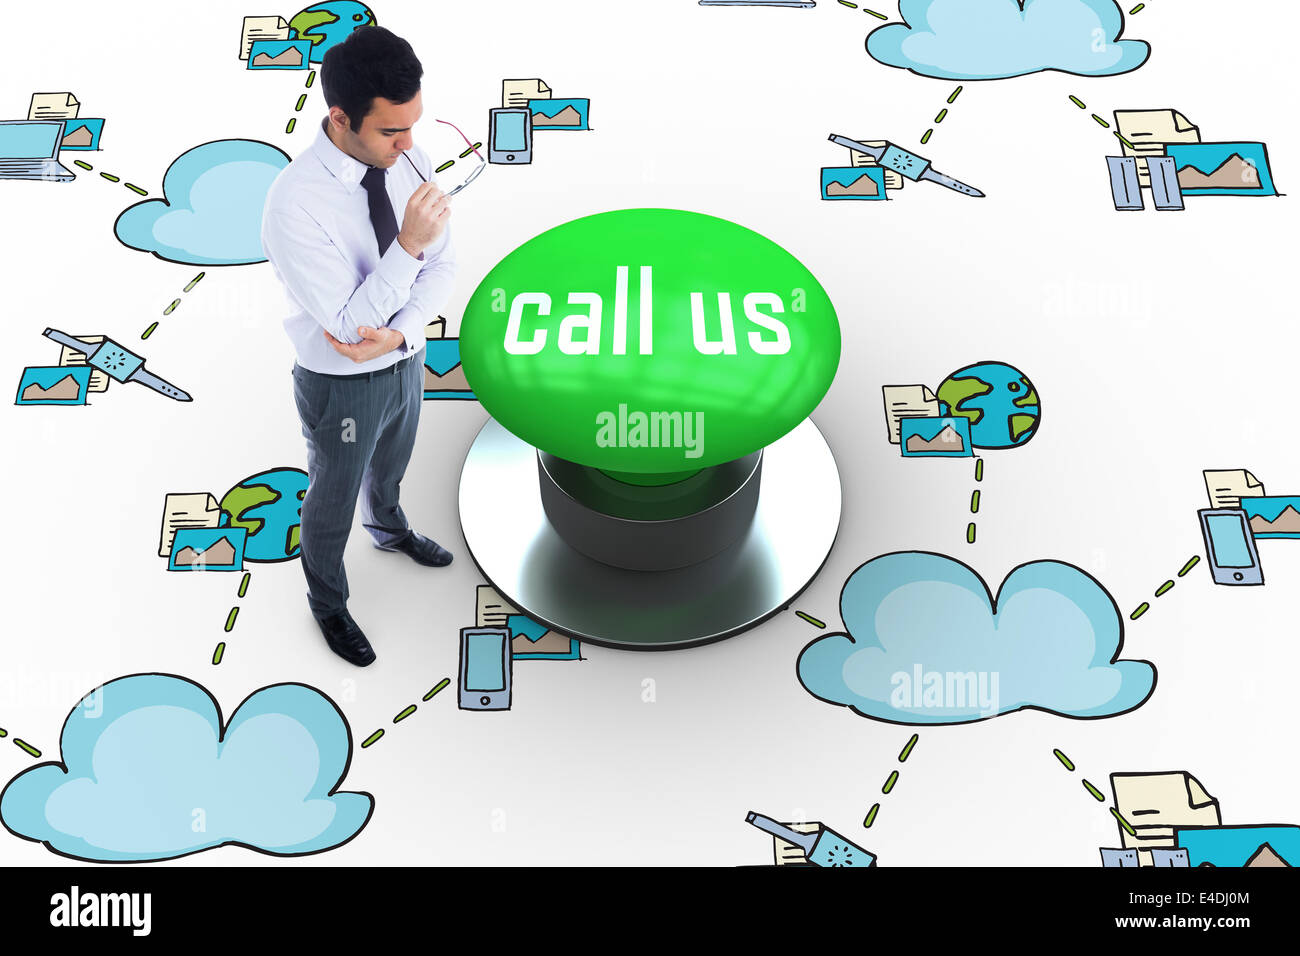 Call us against digitally generated green push button Stock Photo